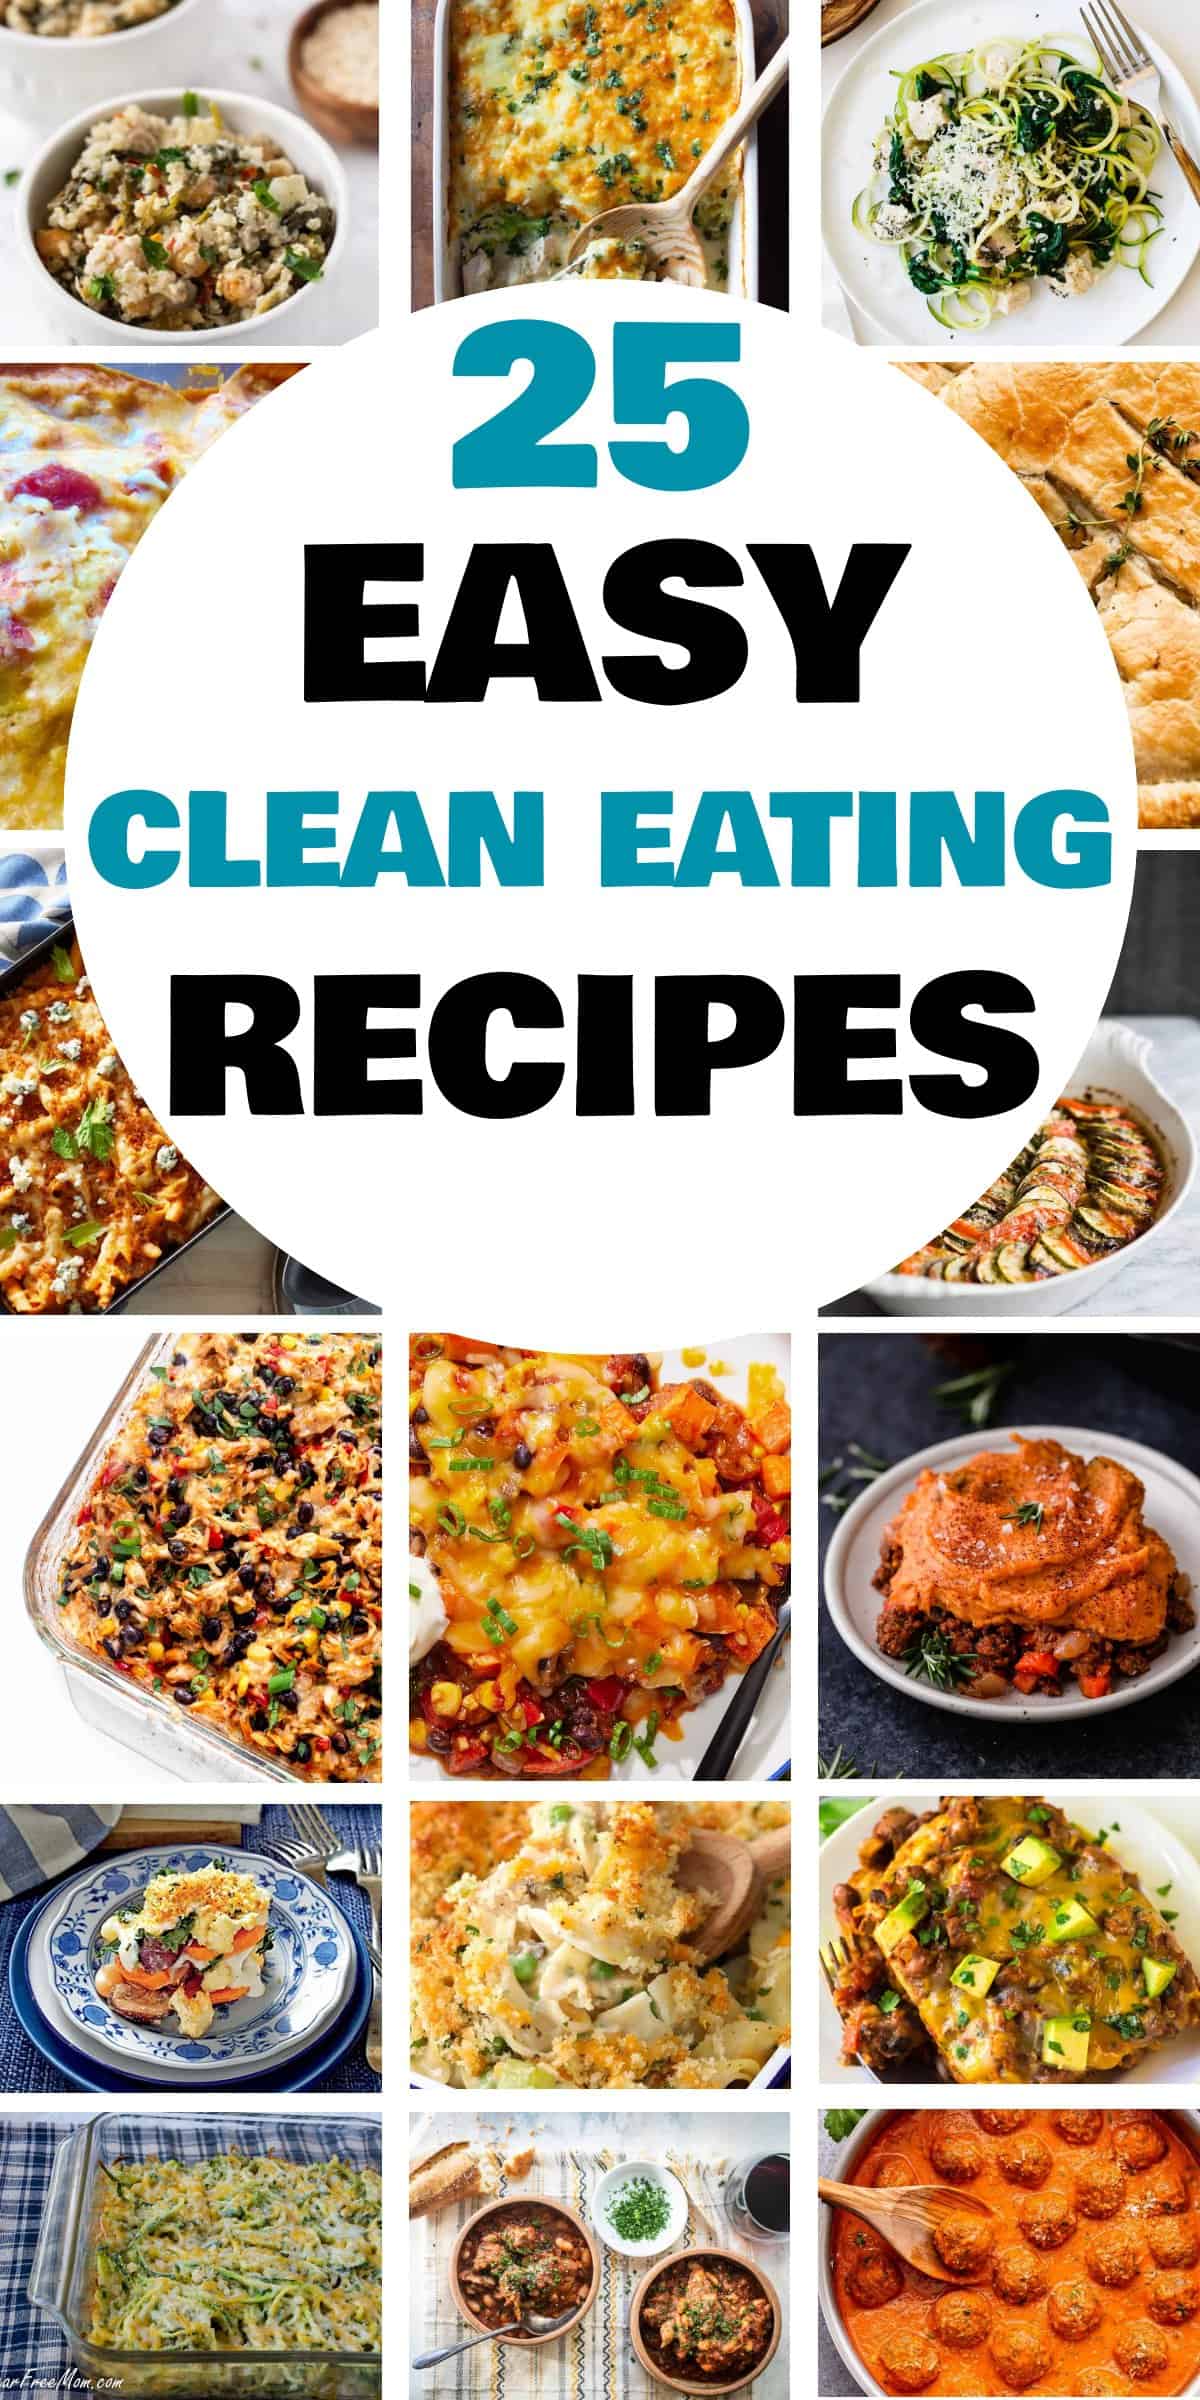 25 Easy Clean Eating Recipes